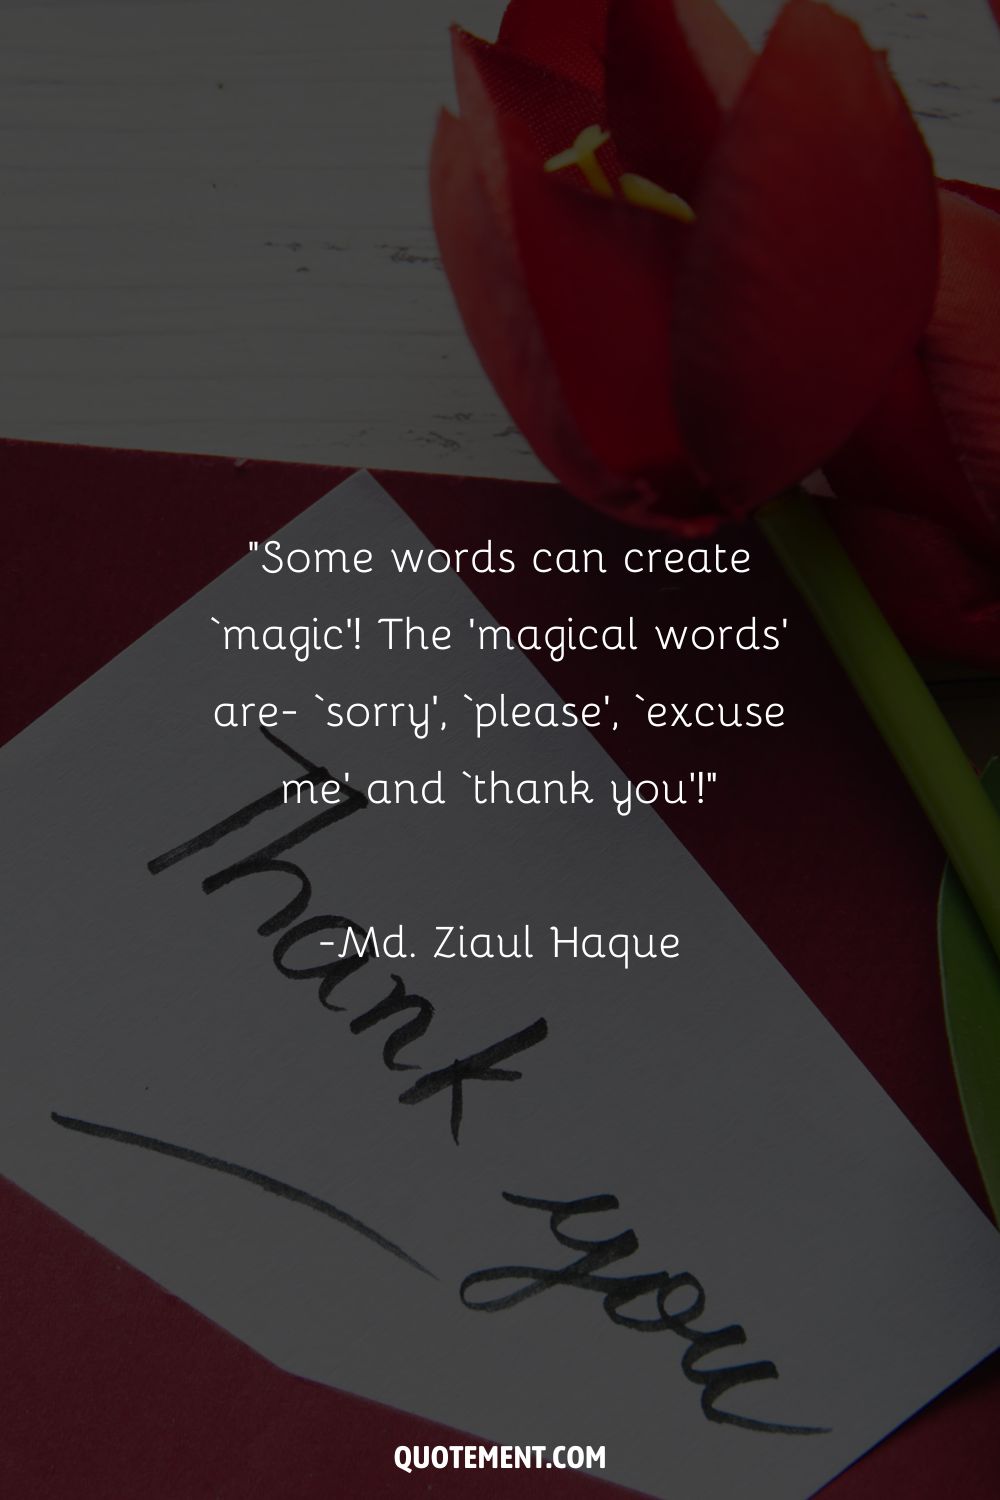 Some words can create ‘magic’!